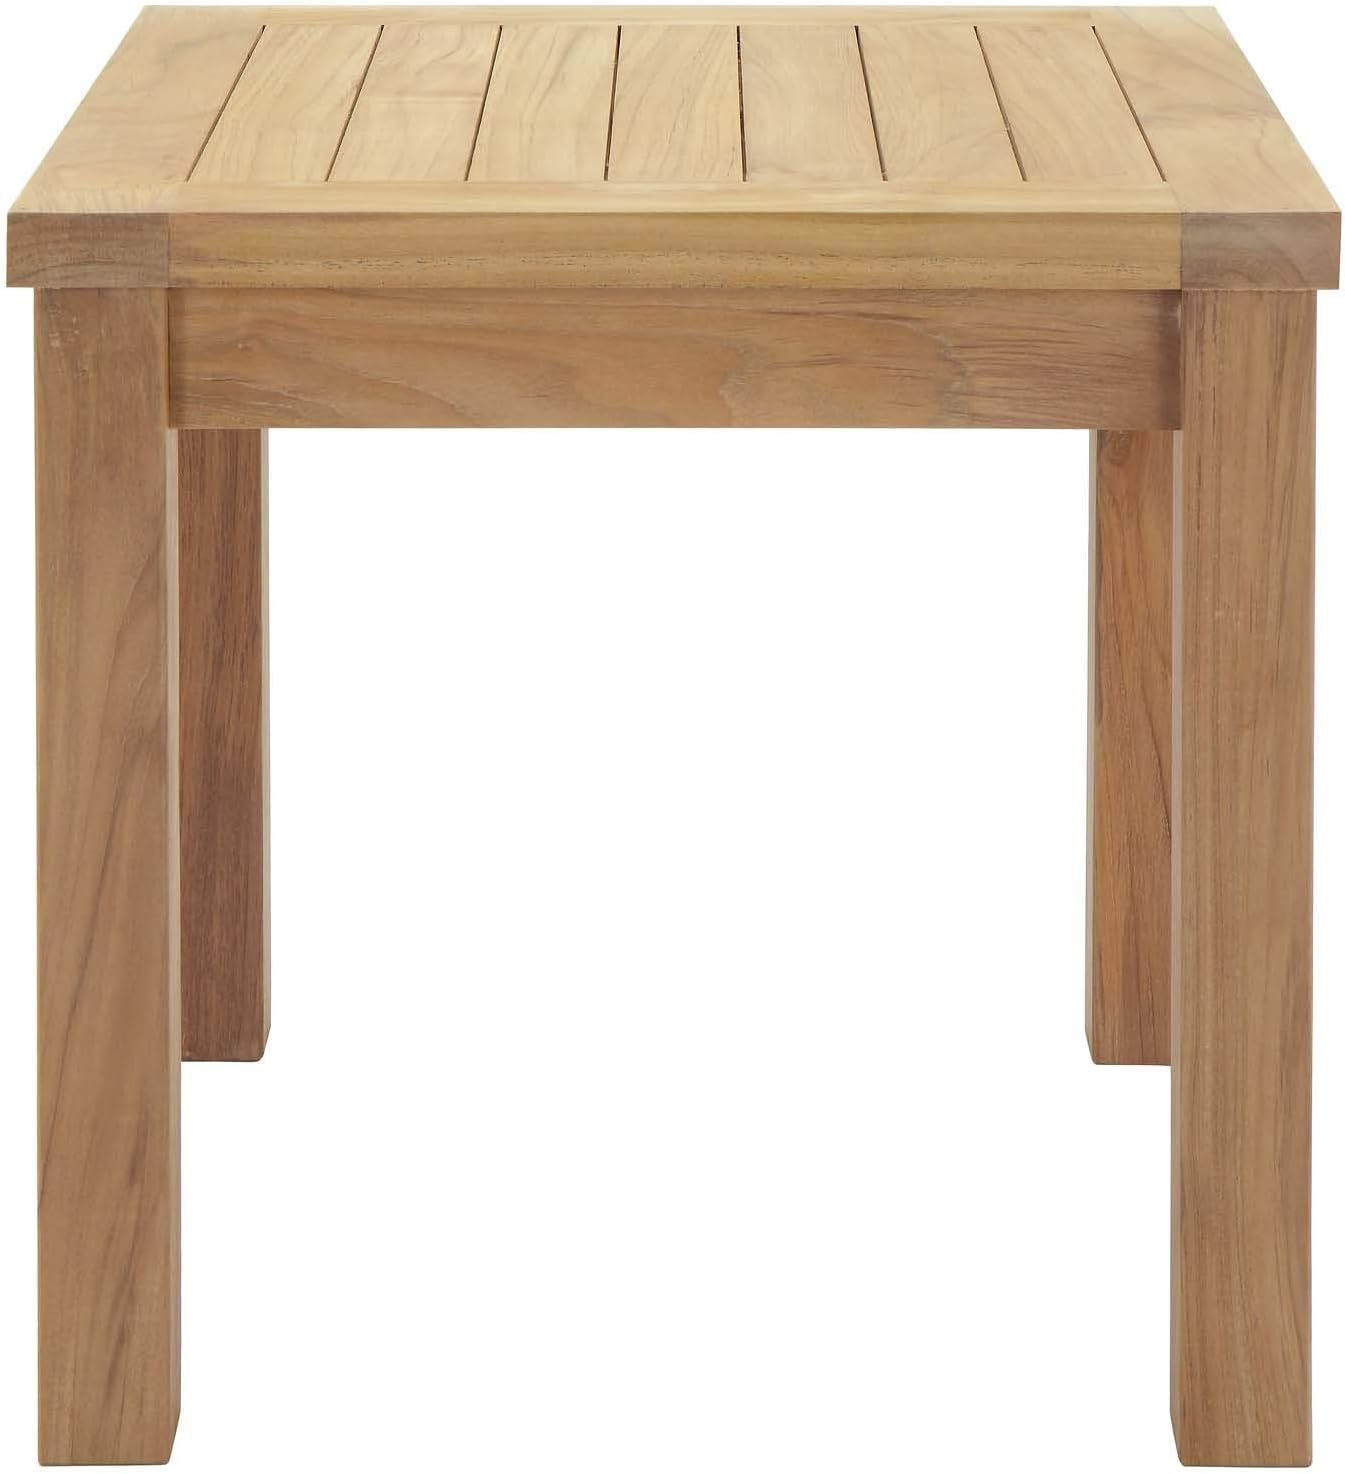 Modway Marina Premium Grade A Teak Wood Outdoor Patio Square Side End Table in Natural | Amazon (US)